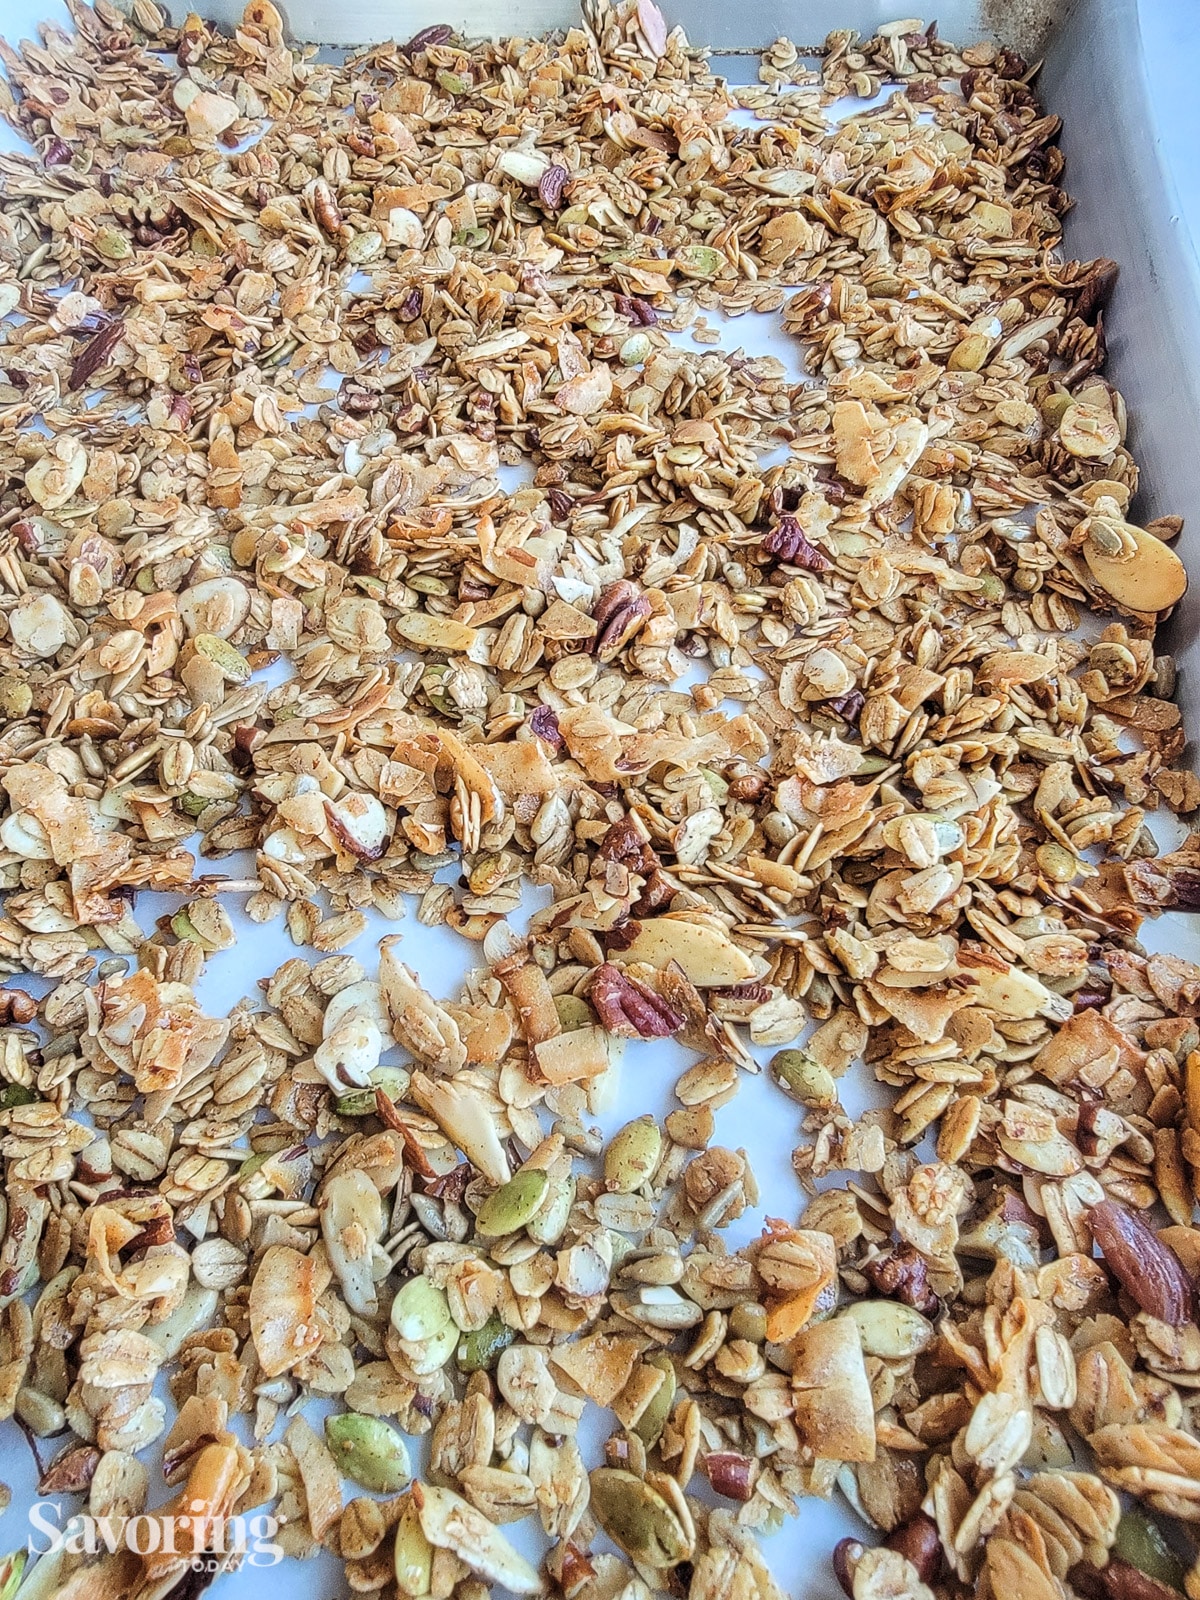 Granola spread on baking pan ready for the oven